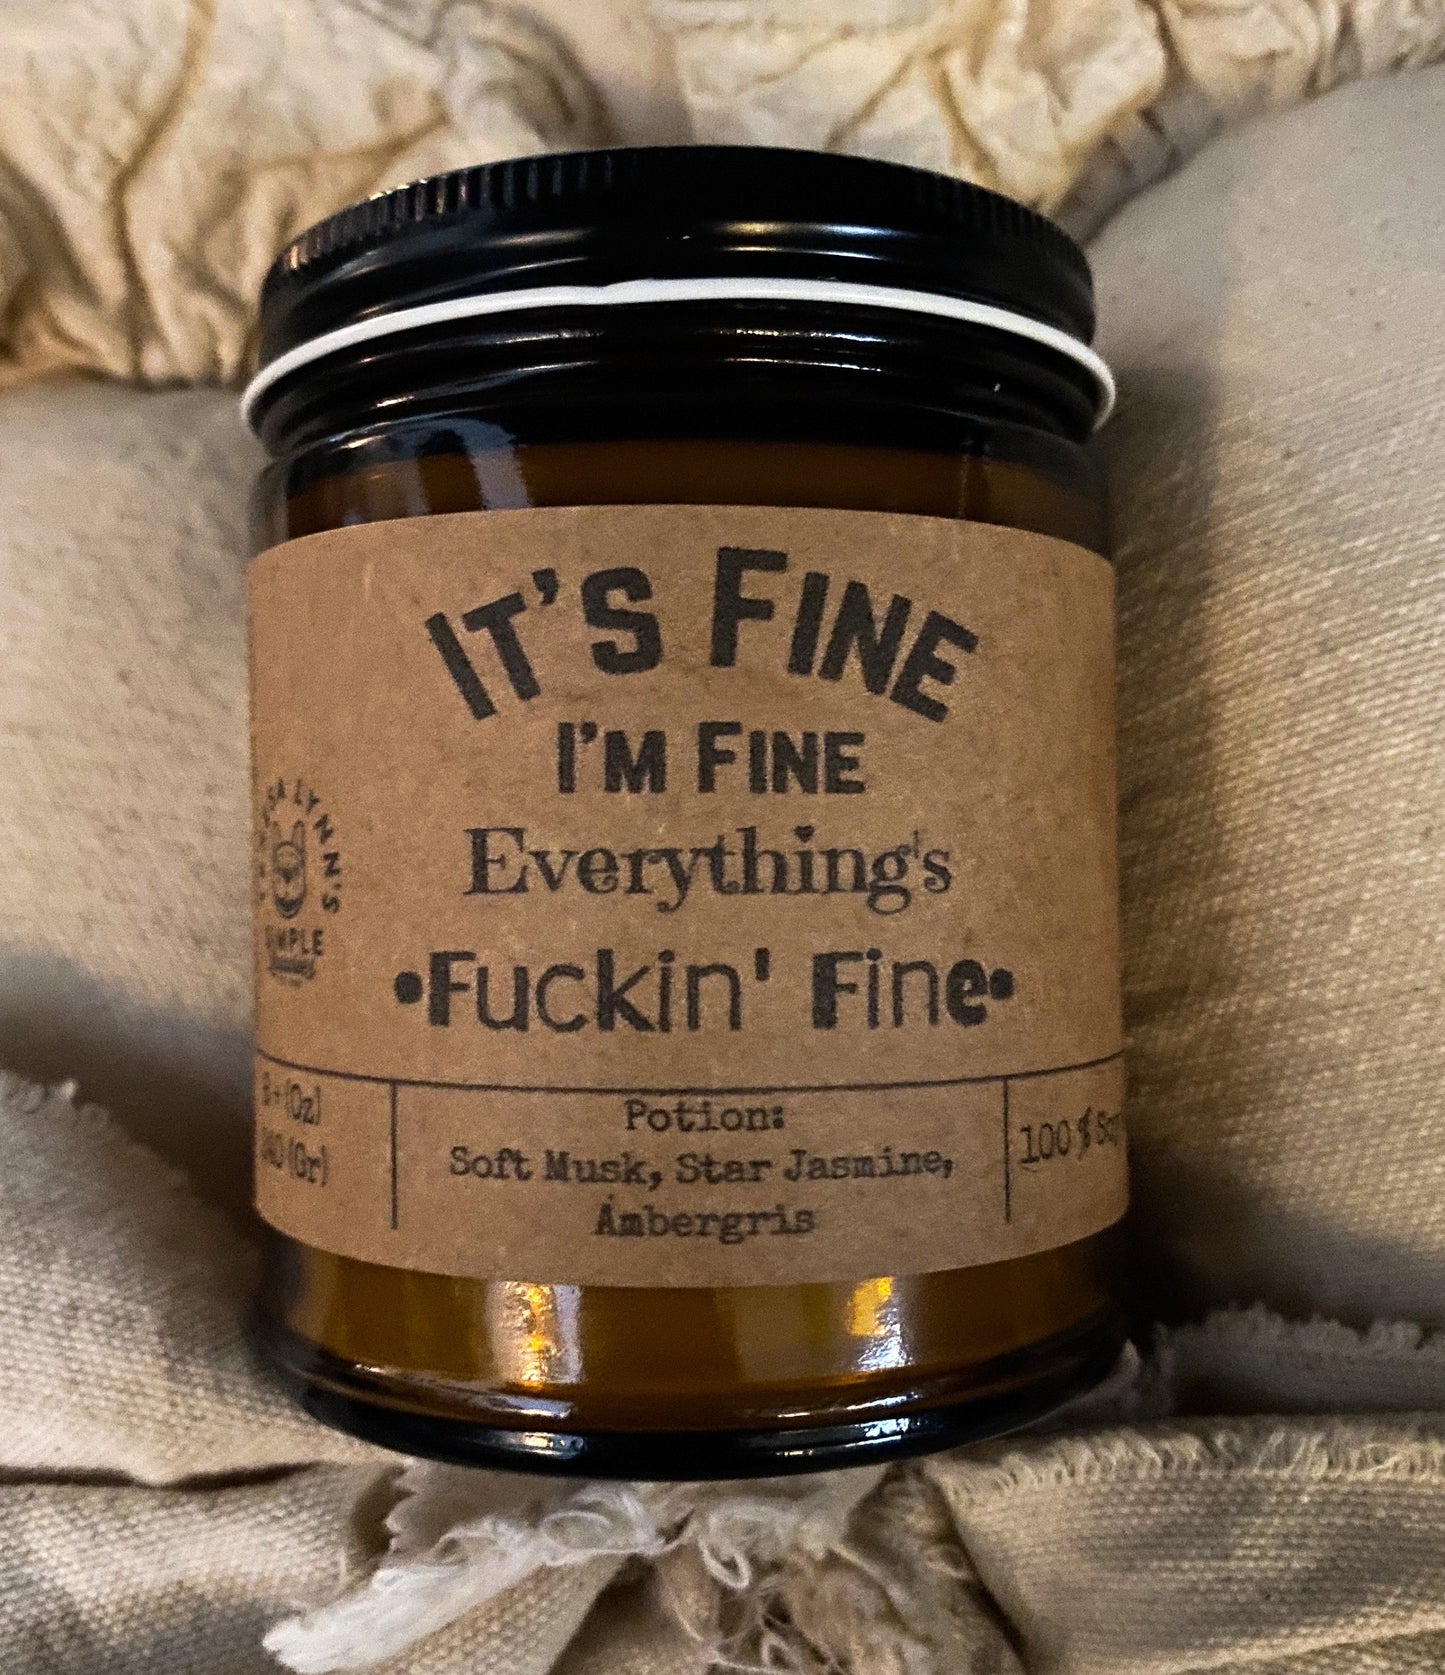 It?s Fine I?m fine Everything?s Fuckin? Fine, Candle, phthalate free, soy wax, apothecary jar, gift for her, mature, funny candle, self care